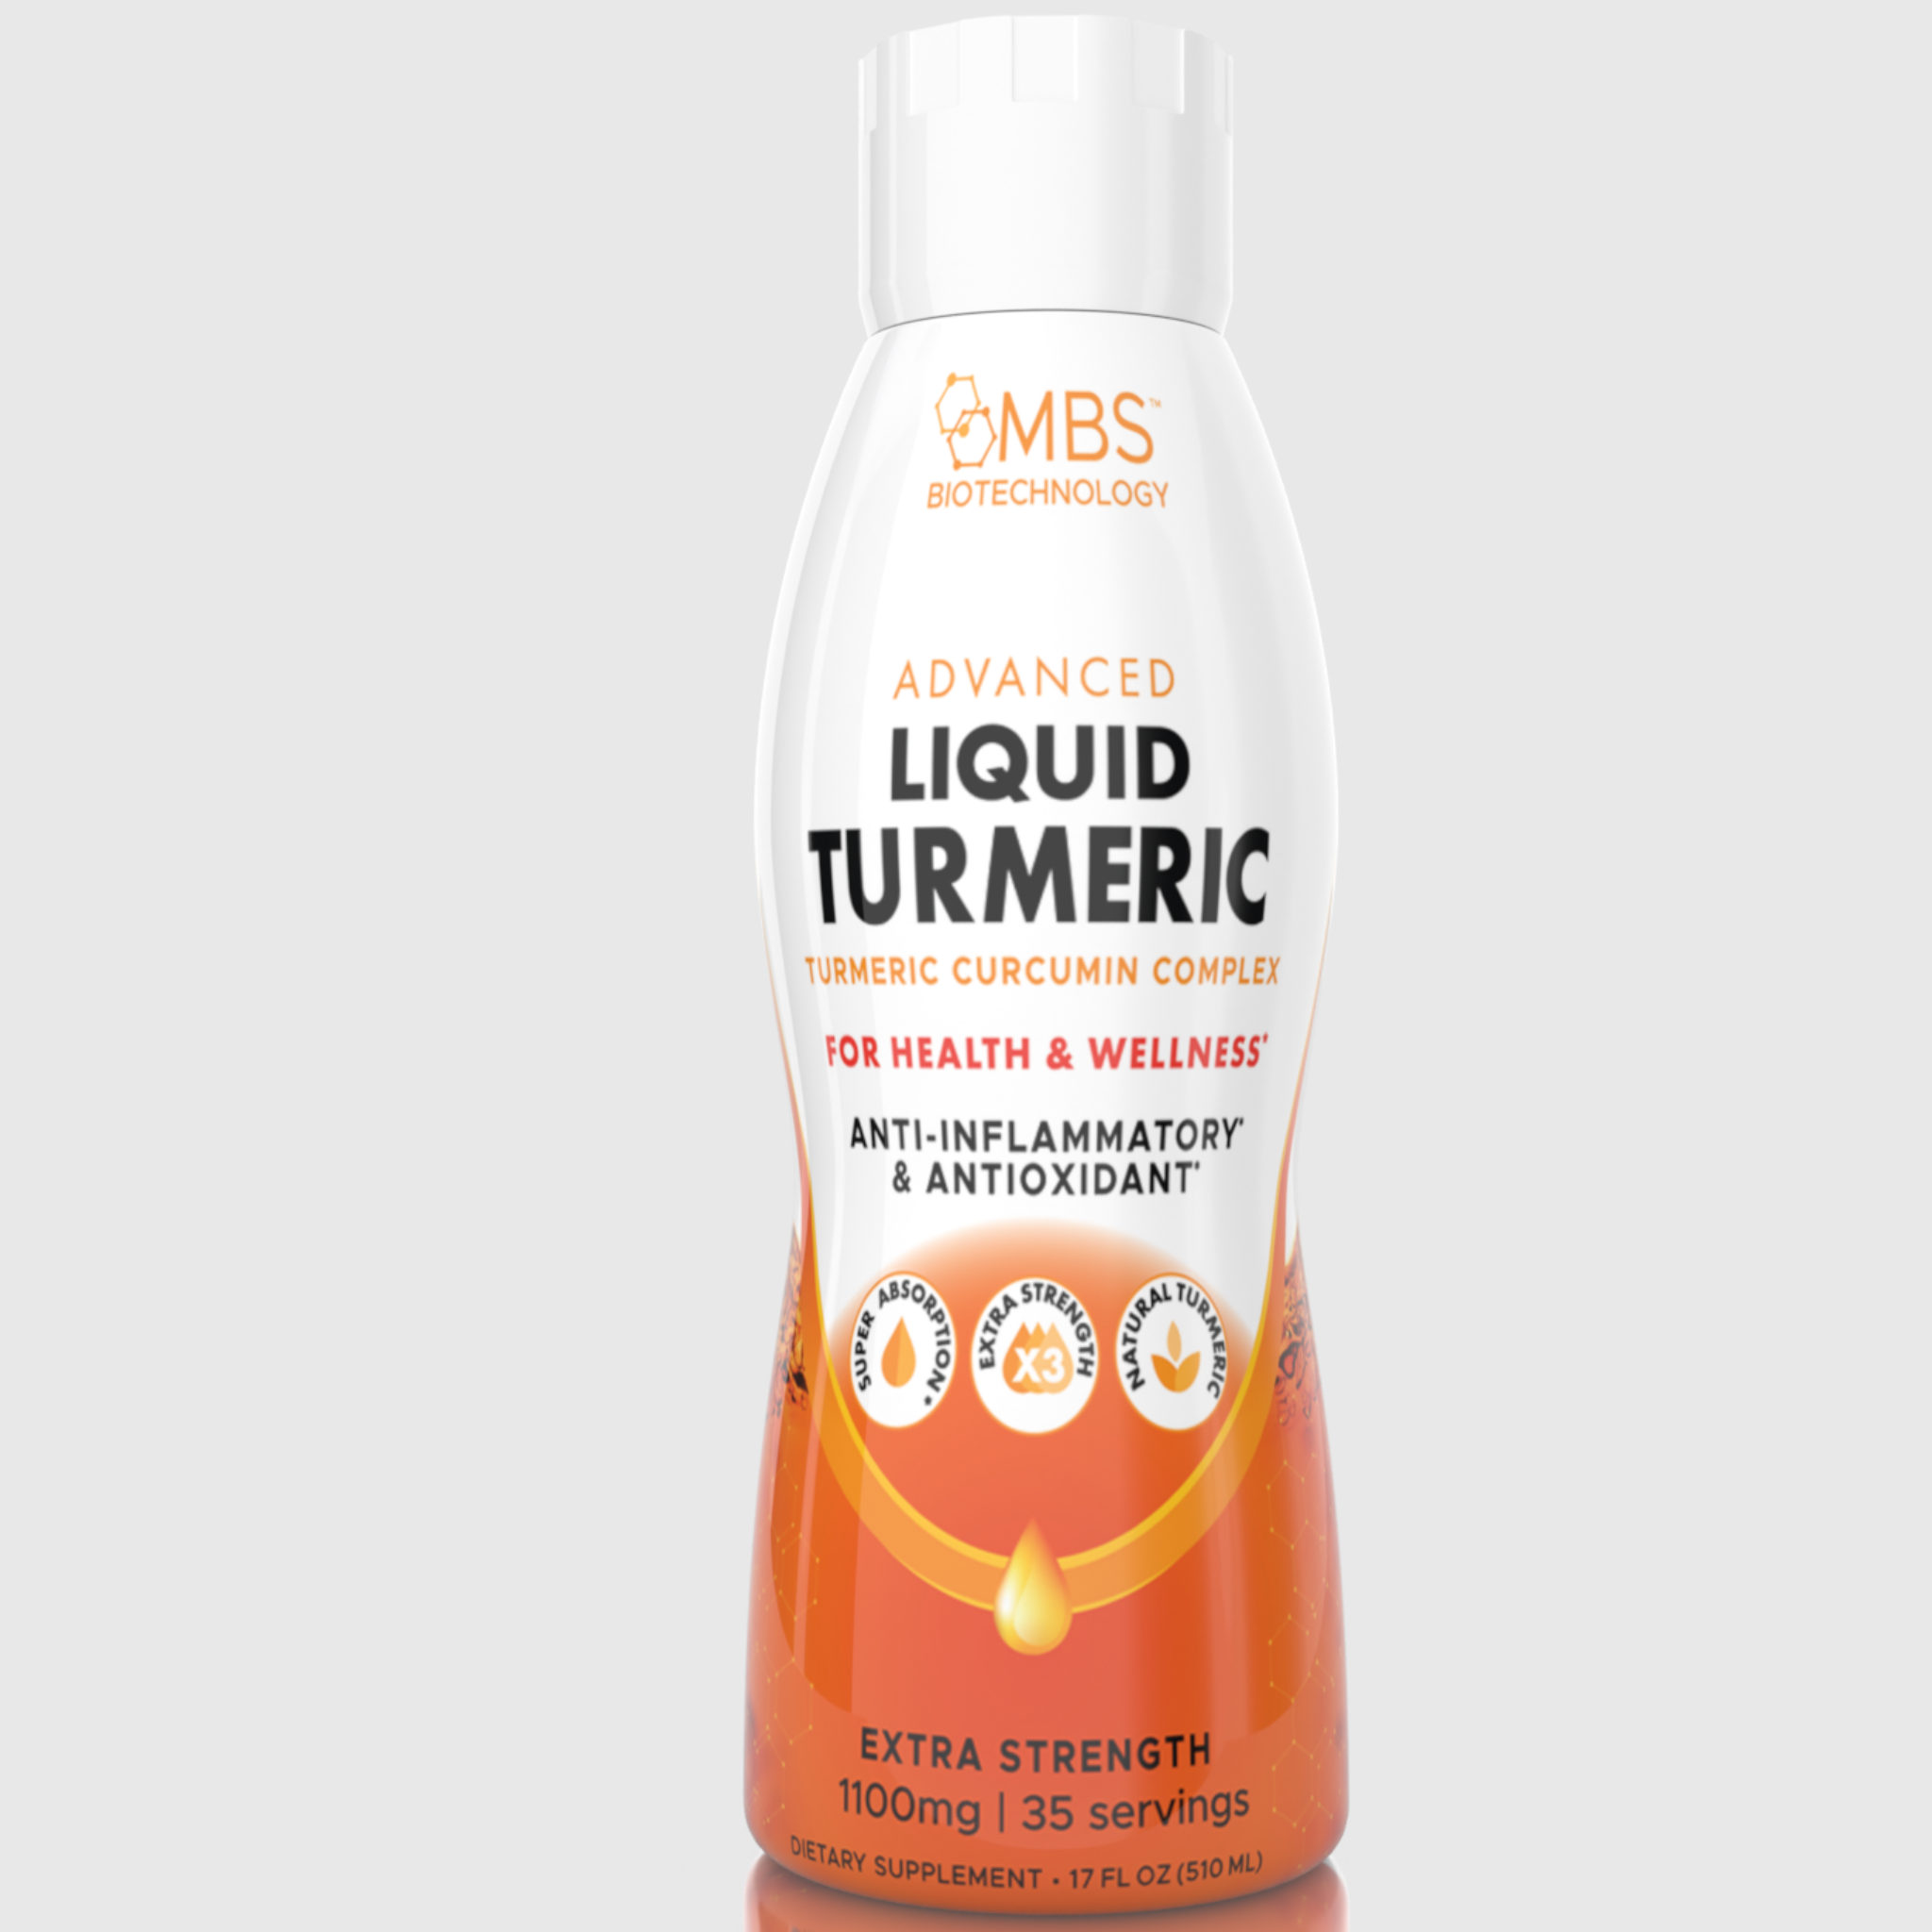 Liquid Turmeric image with gray background for anti-inflammatory